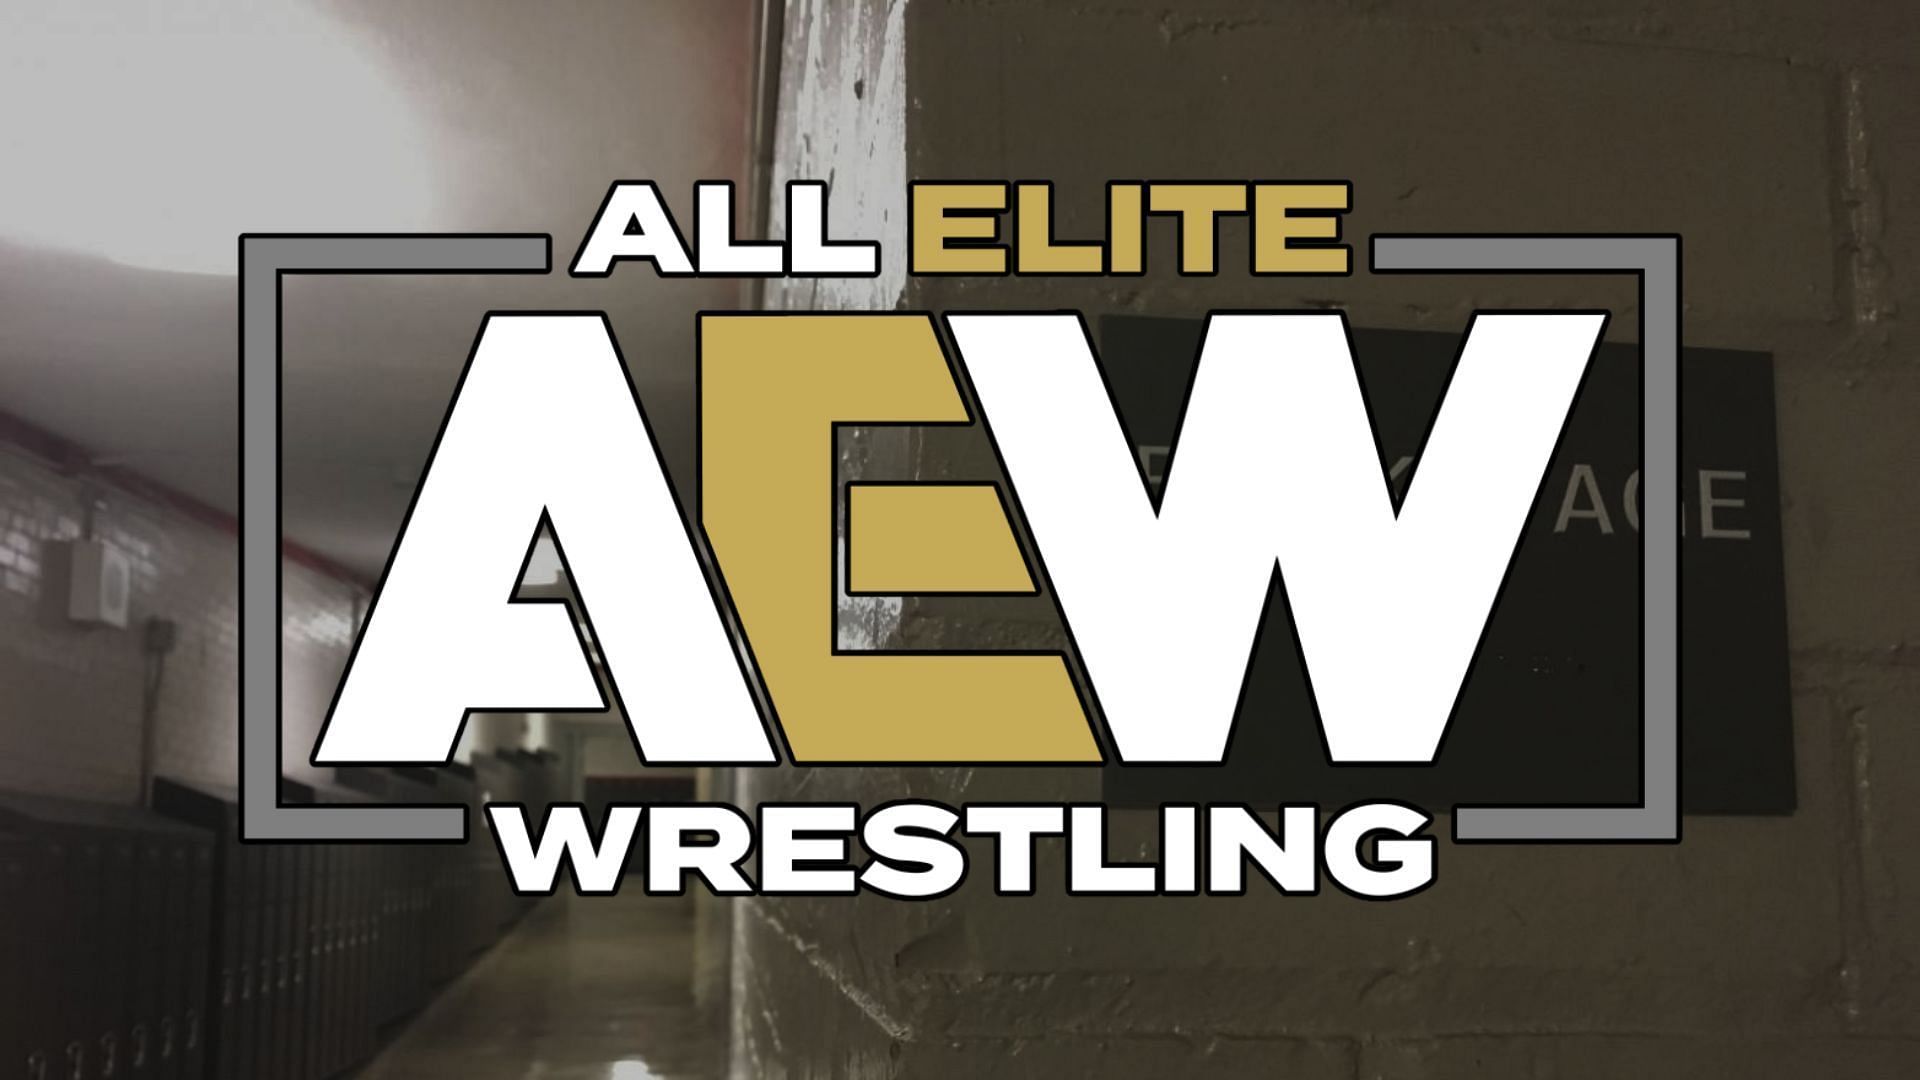 Several names have been barred from AEW Collision.